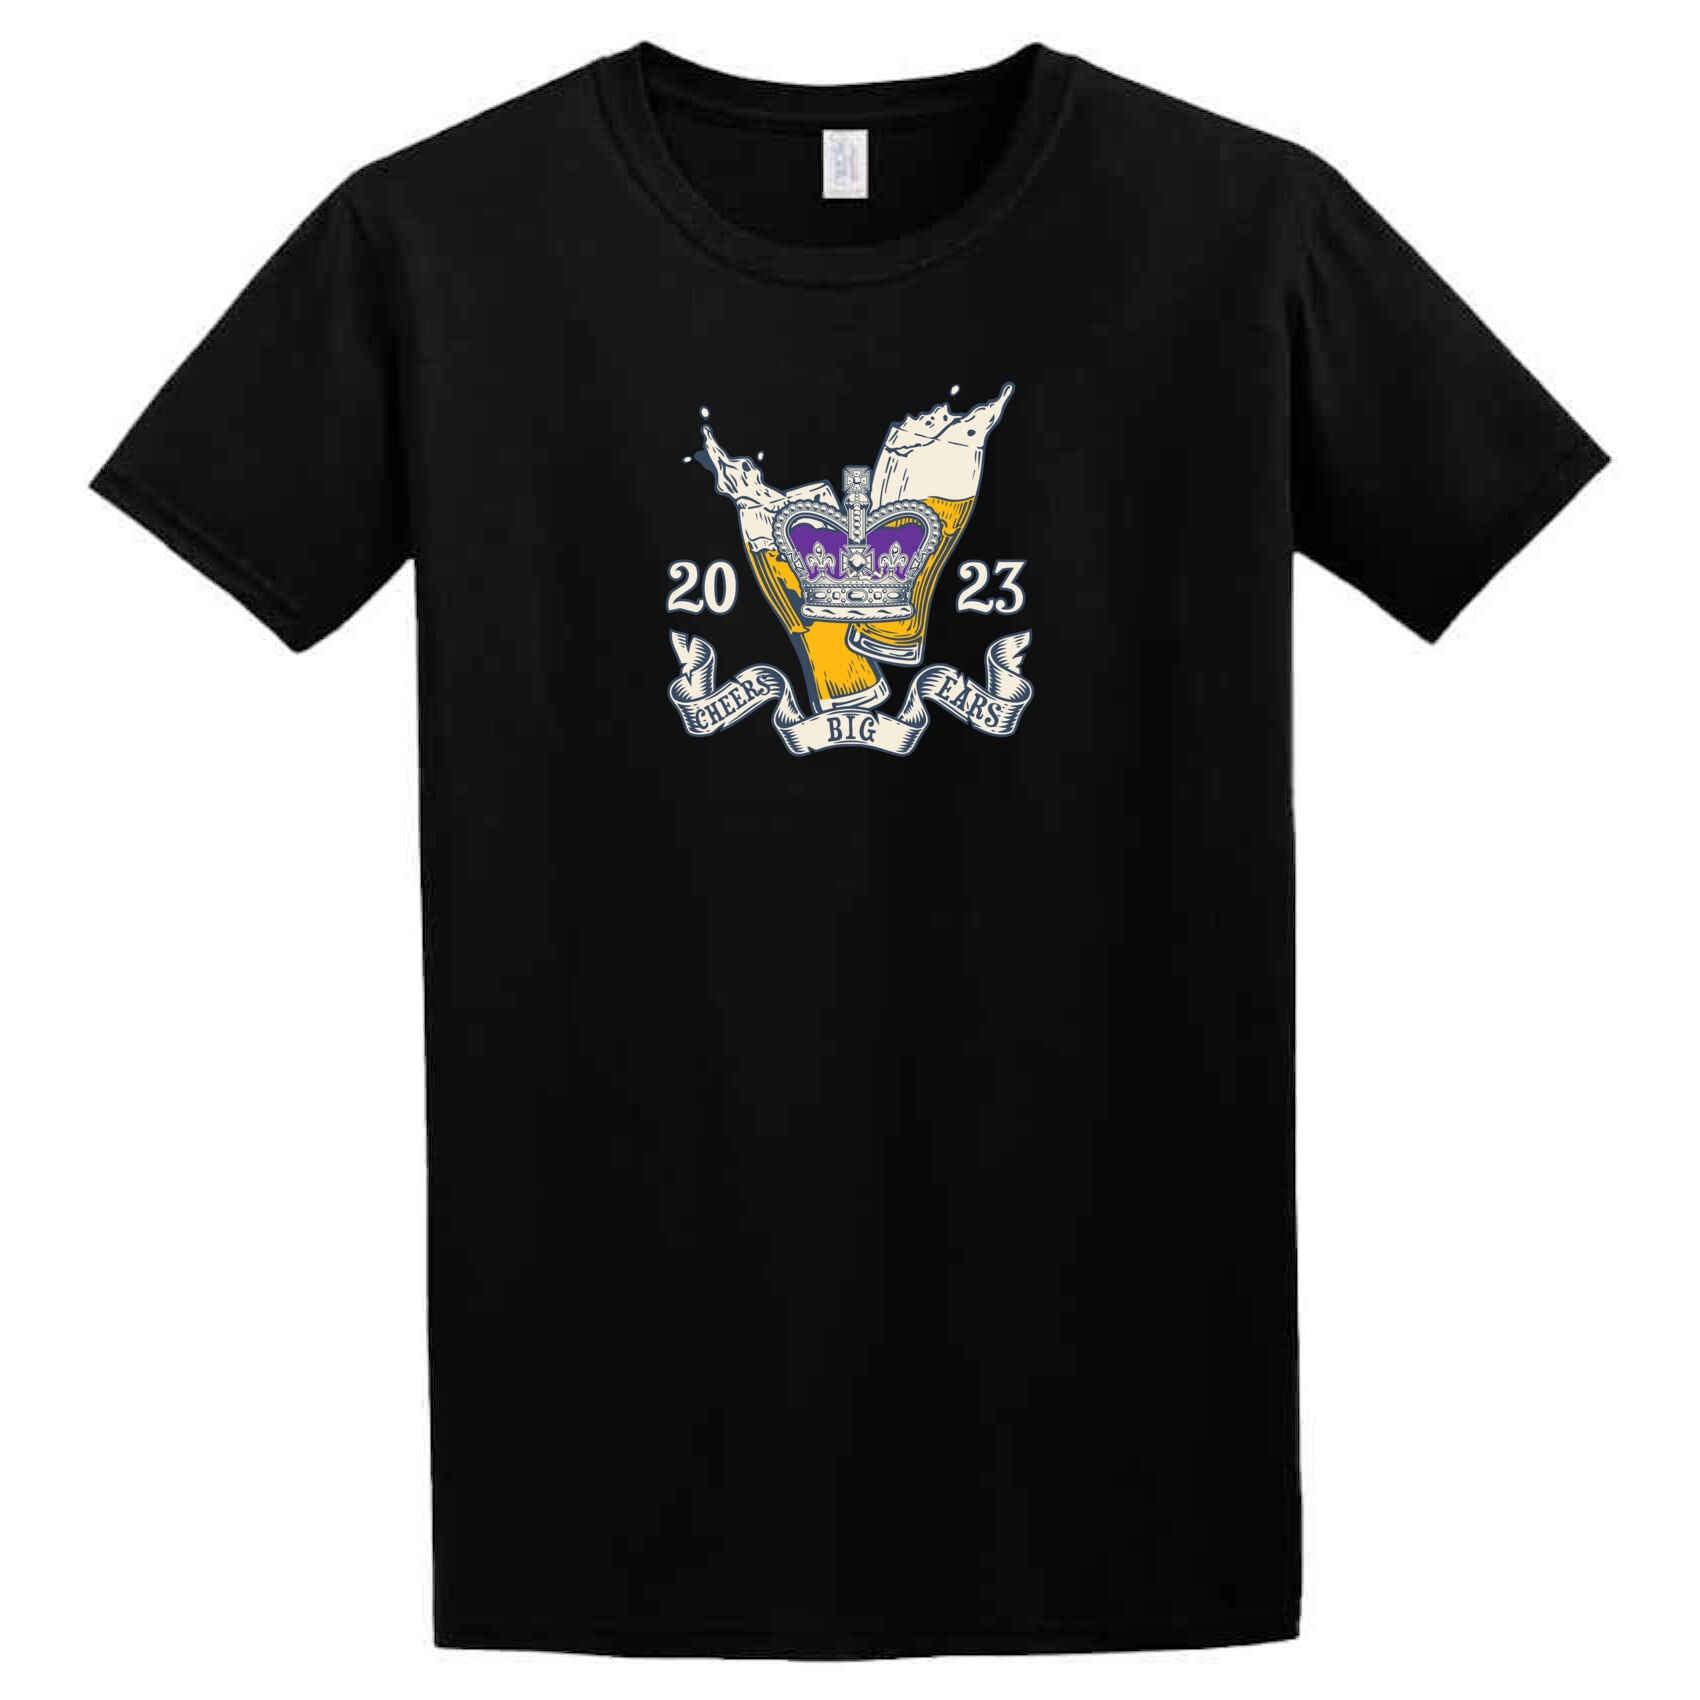 A historical satire Cheers Big Ears T-Shirt featuring the Los Angeles Lakers logo by Twisted Gifts.